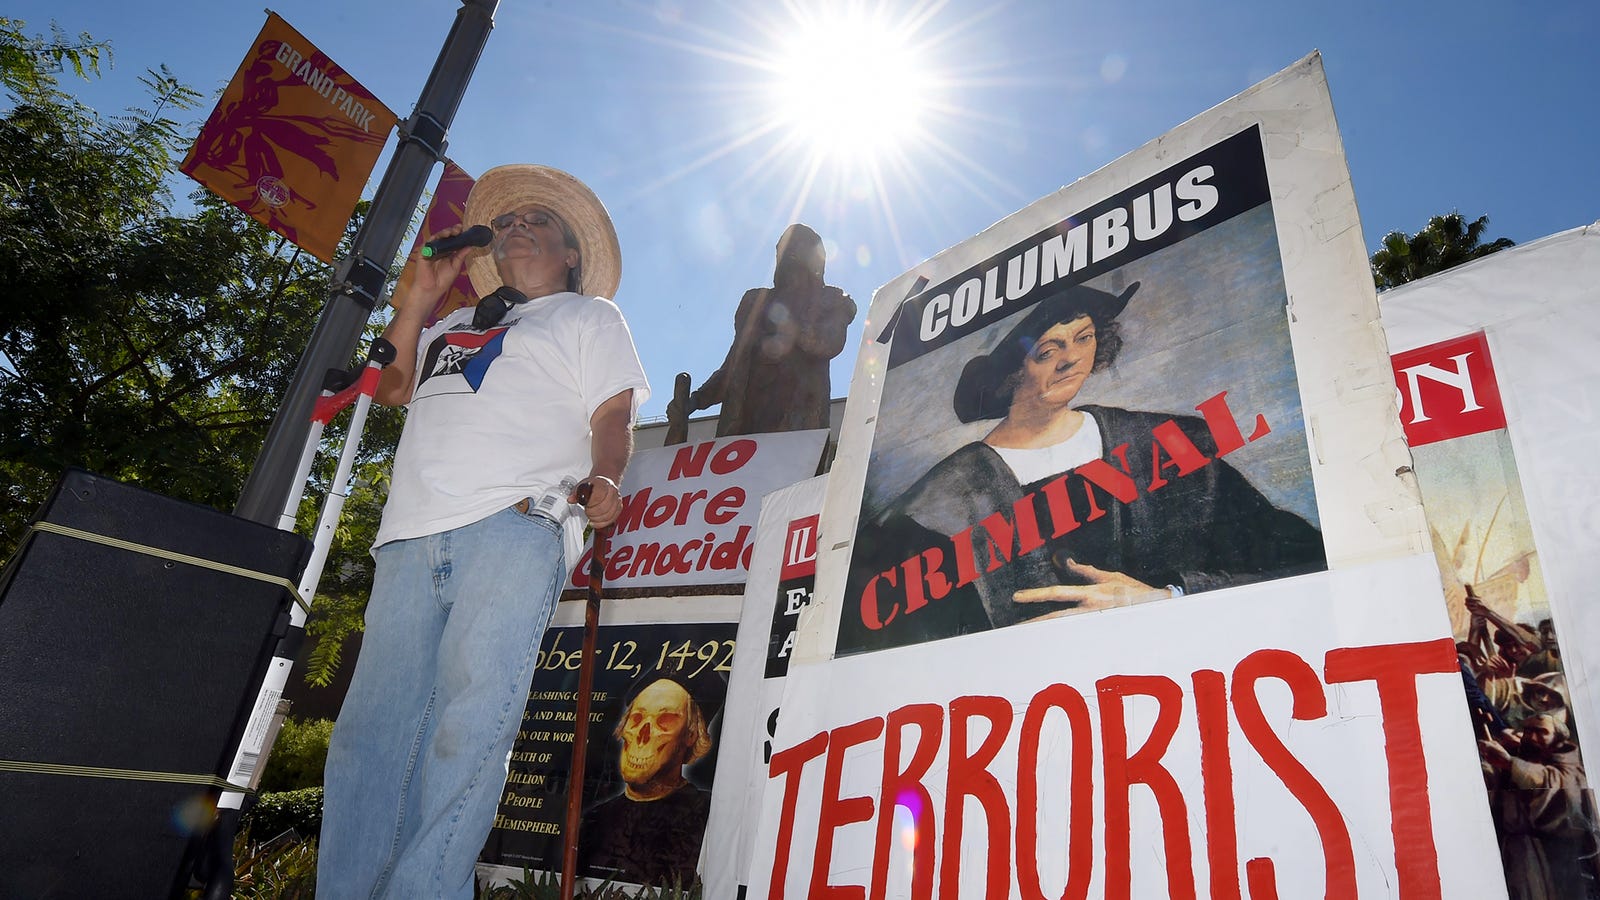 Columbus Day Protests Once Again Erupt As Nation Struggles With Its